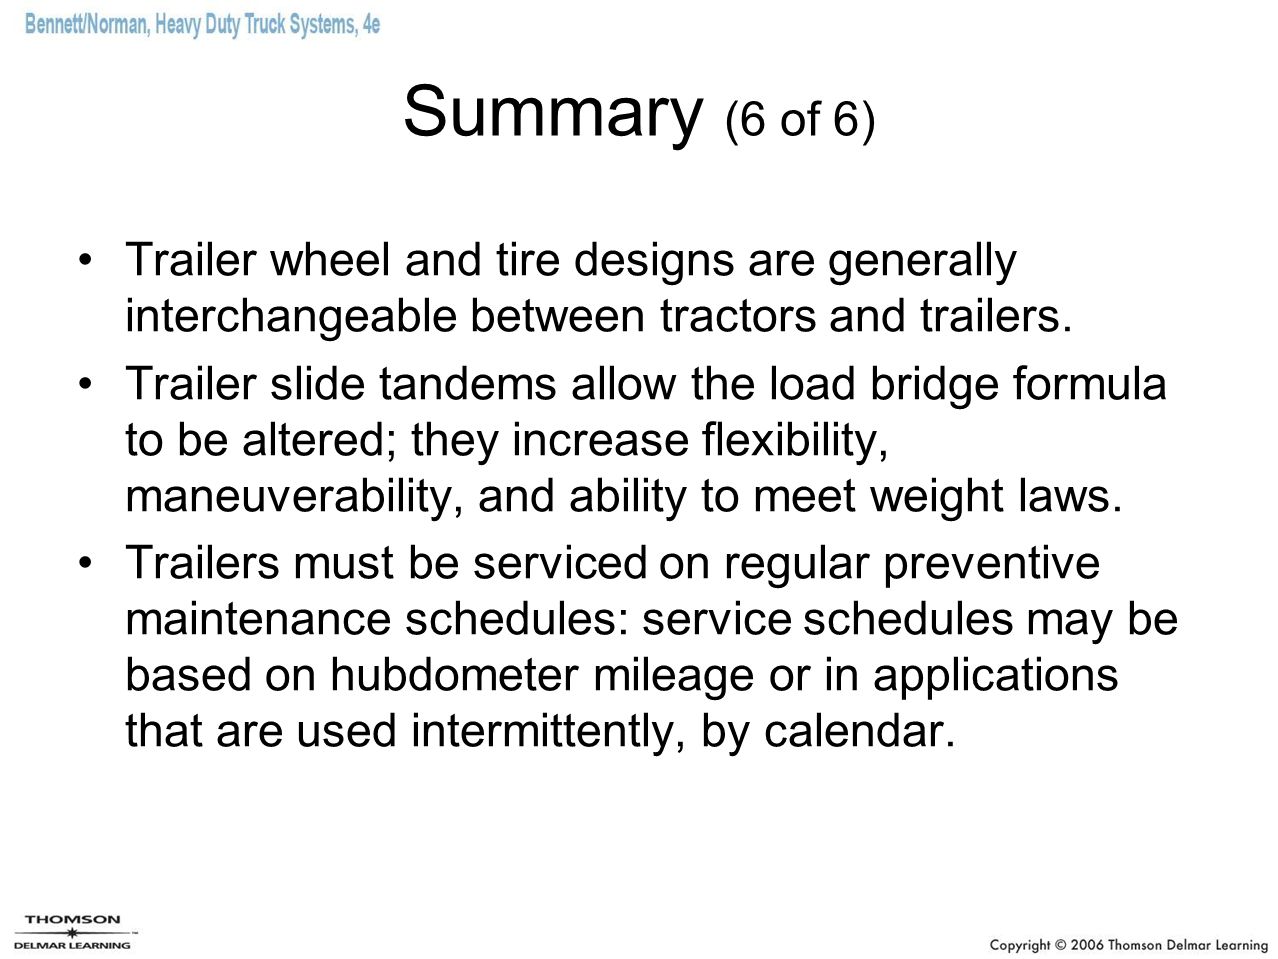 Summary (6 of 6) Trailer wheel and tire designs are generally interchangeable between tractors and trailers.